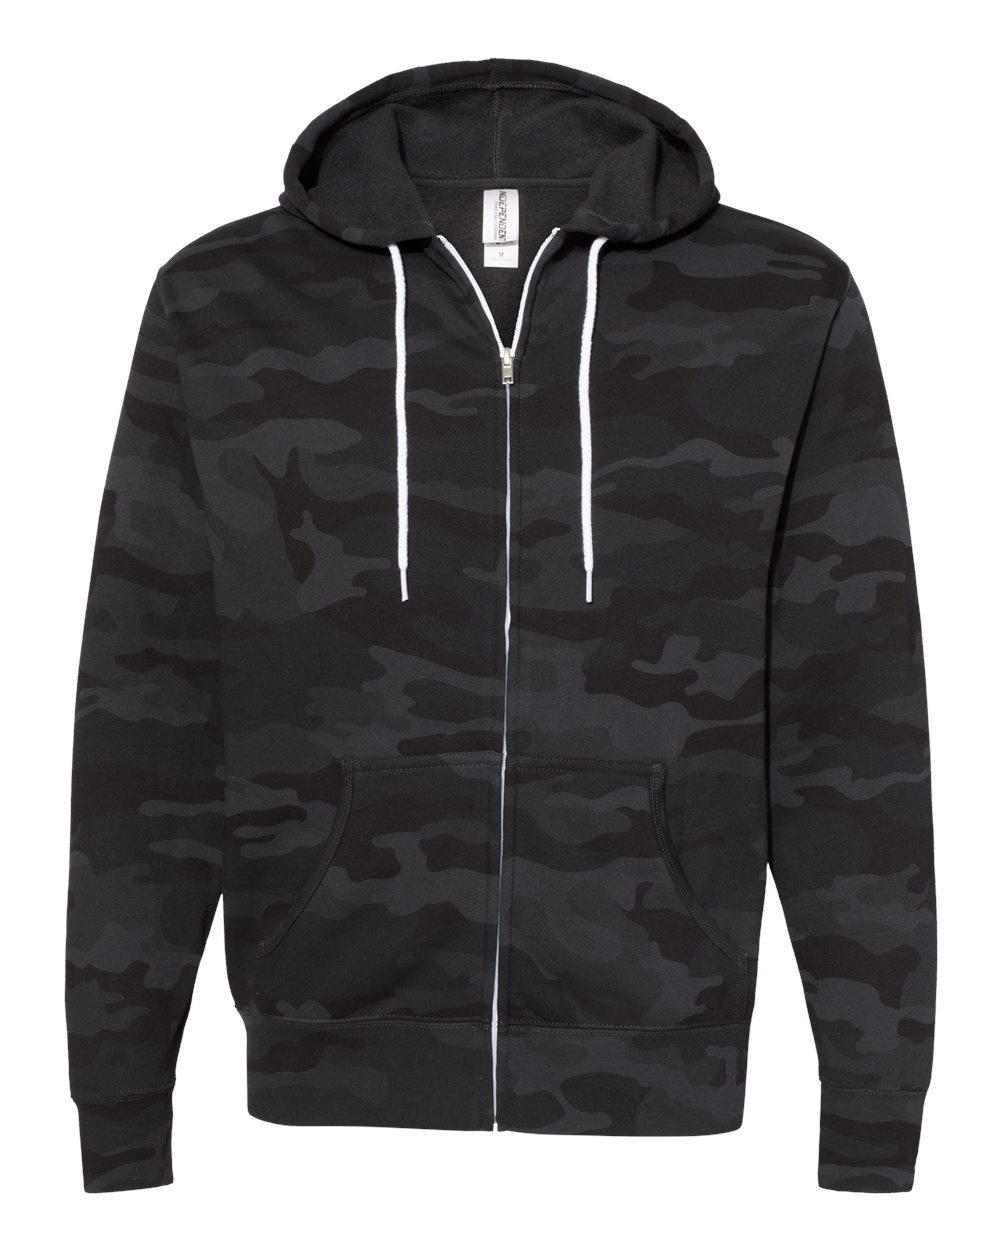 Picture of Independent Trading Co. Lightweight Full-Zip Hooded Sweatshirt